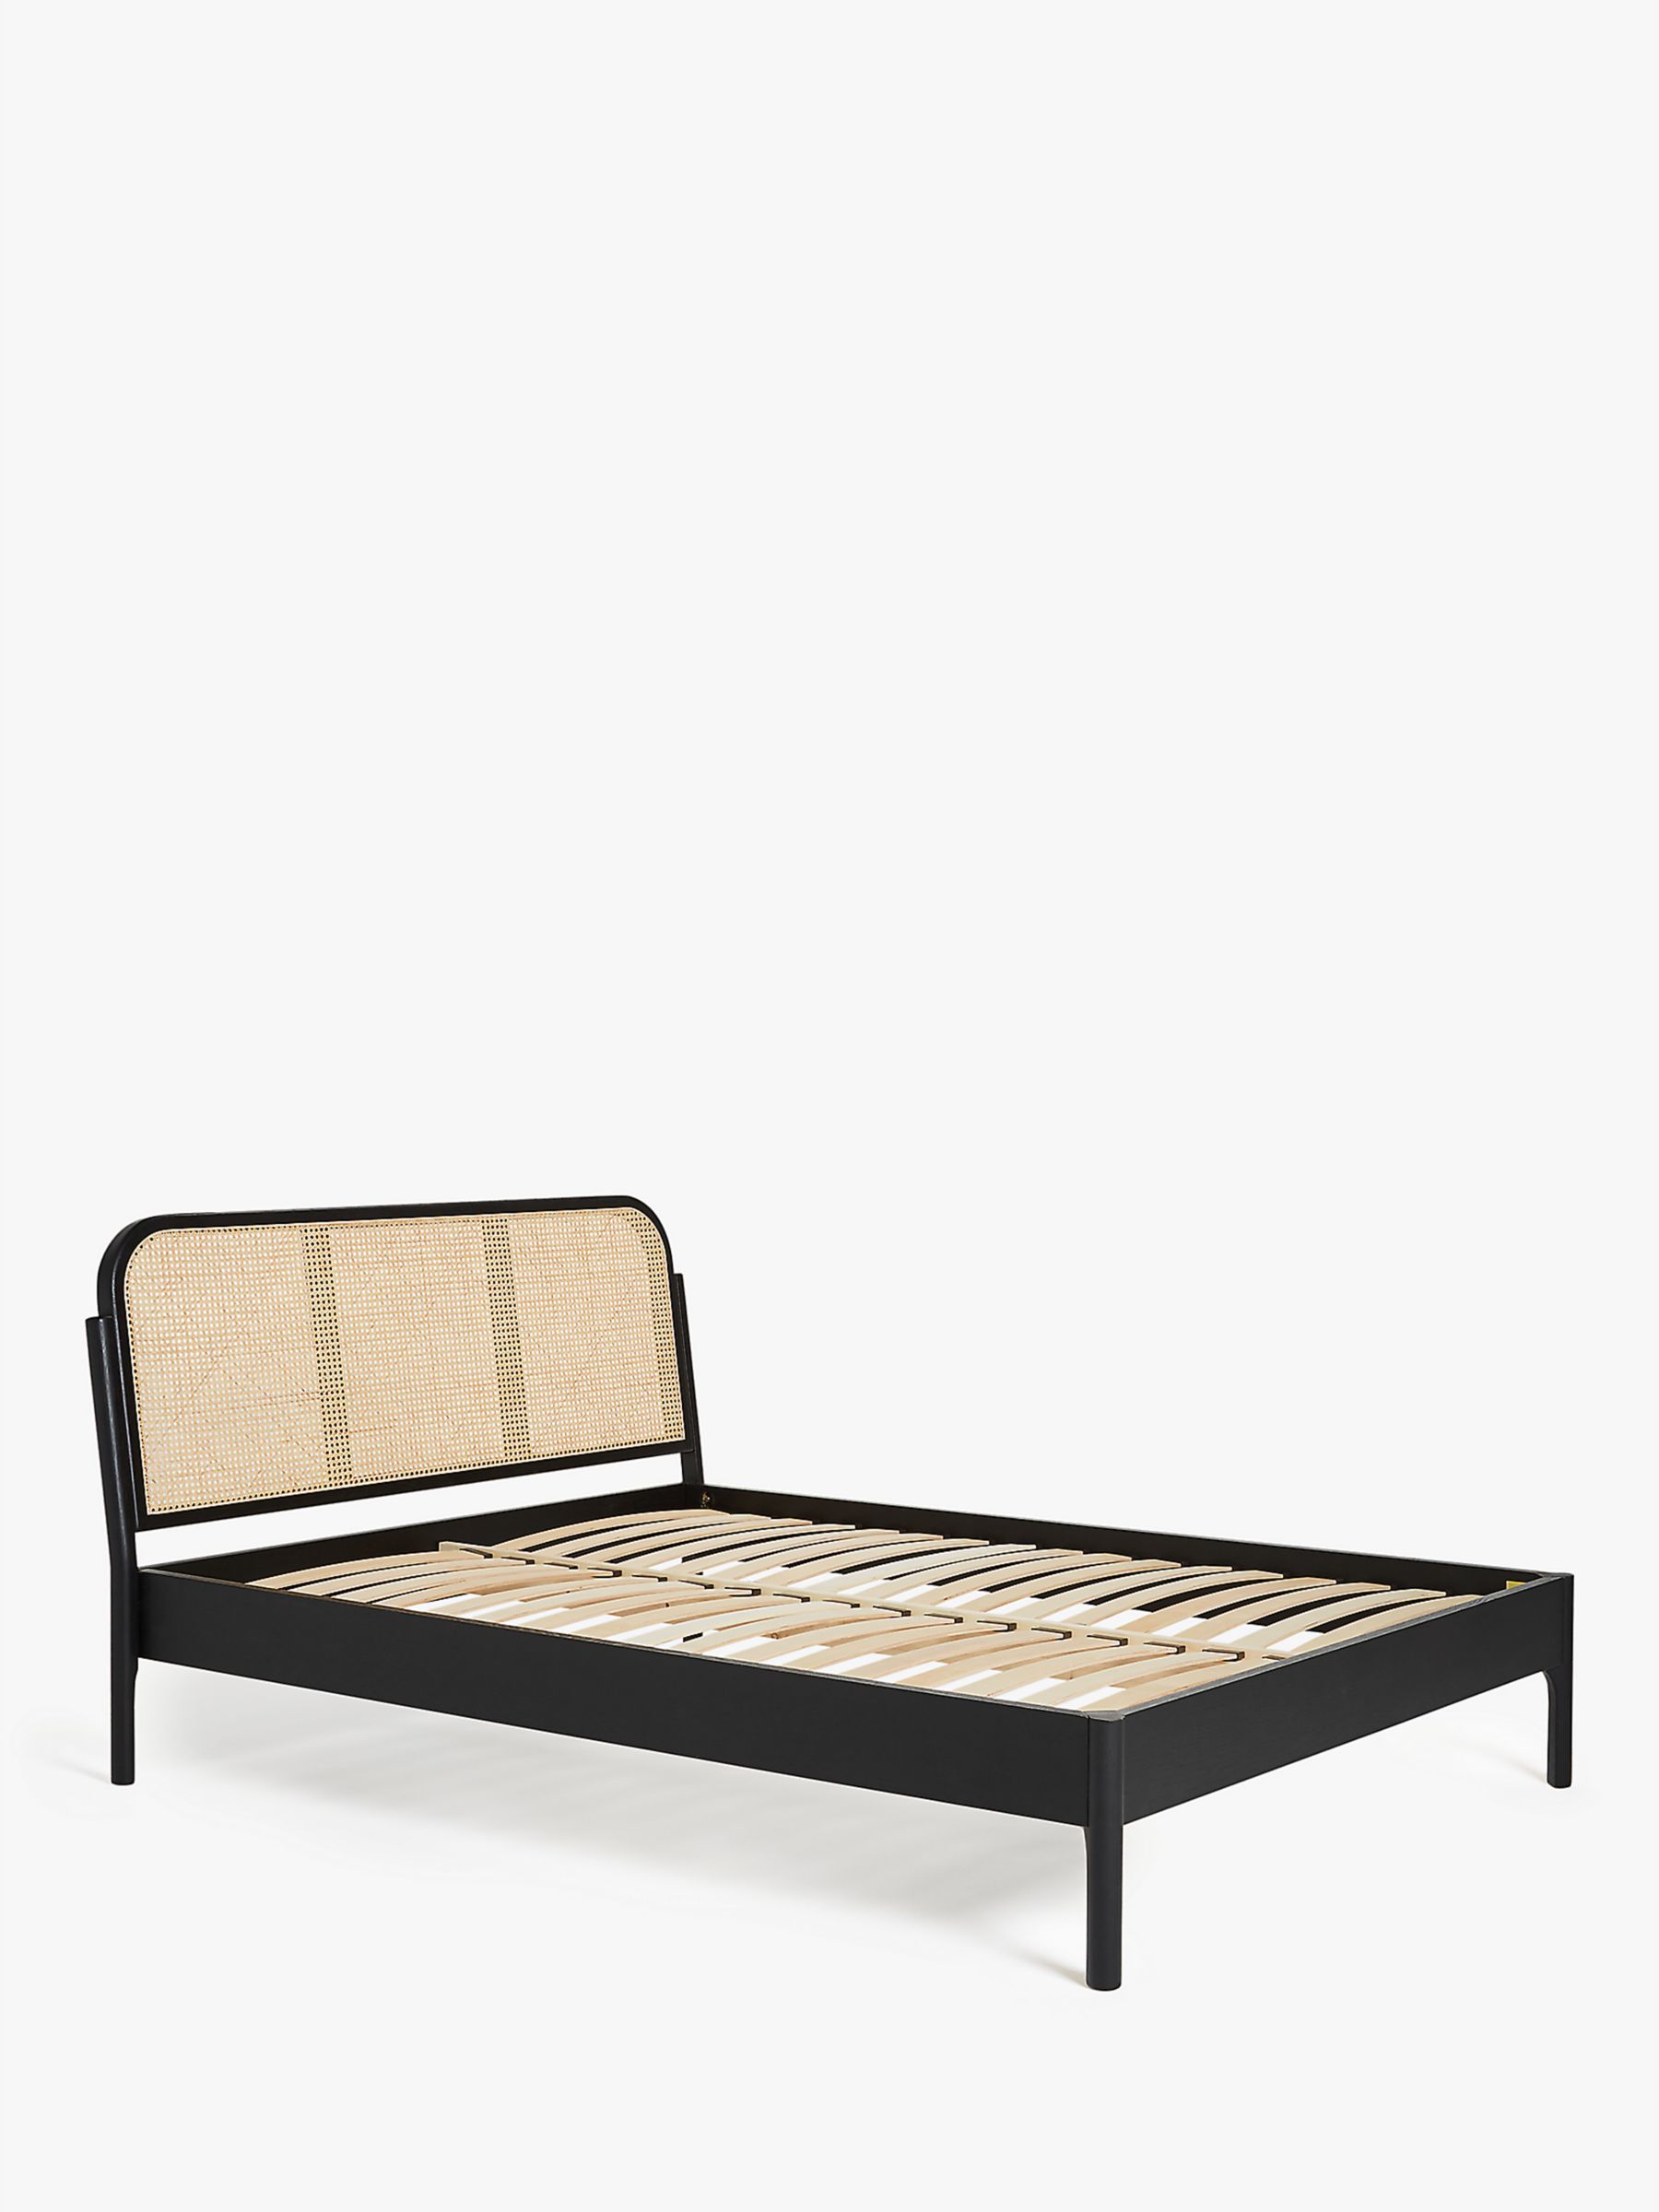 Photo of John lewis rattan bed frame double